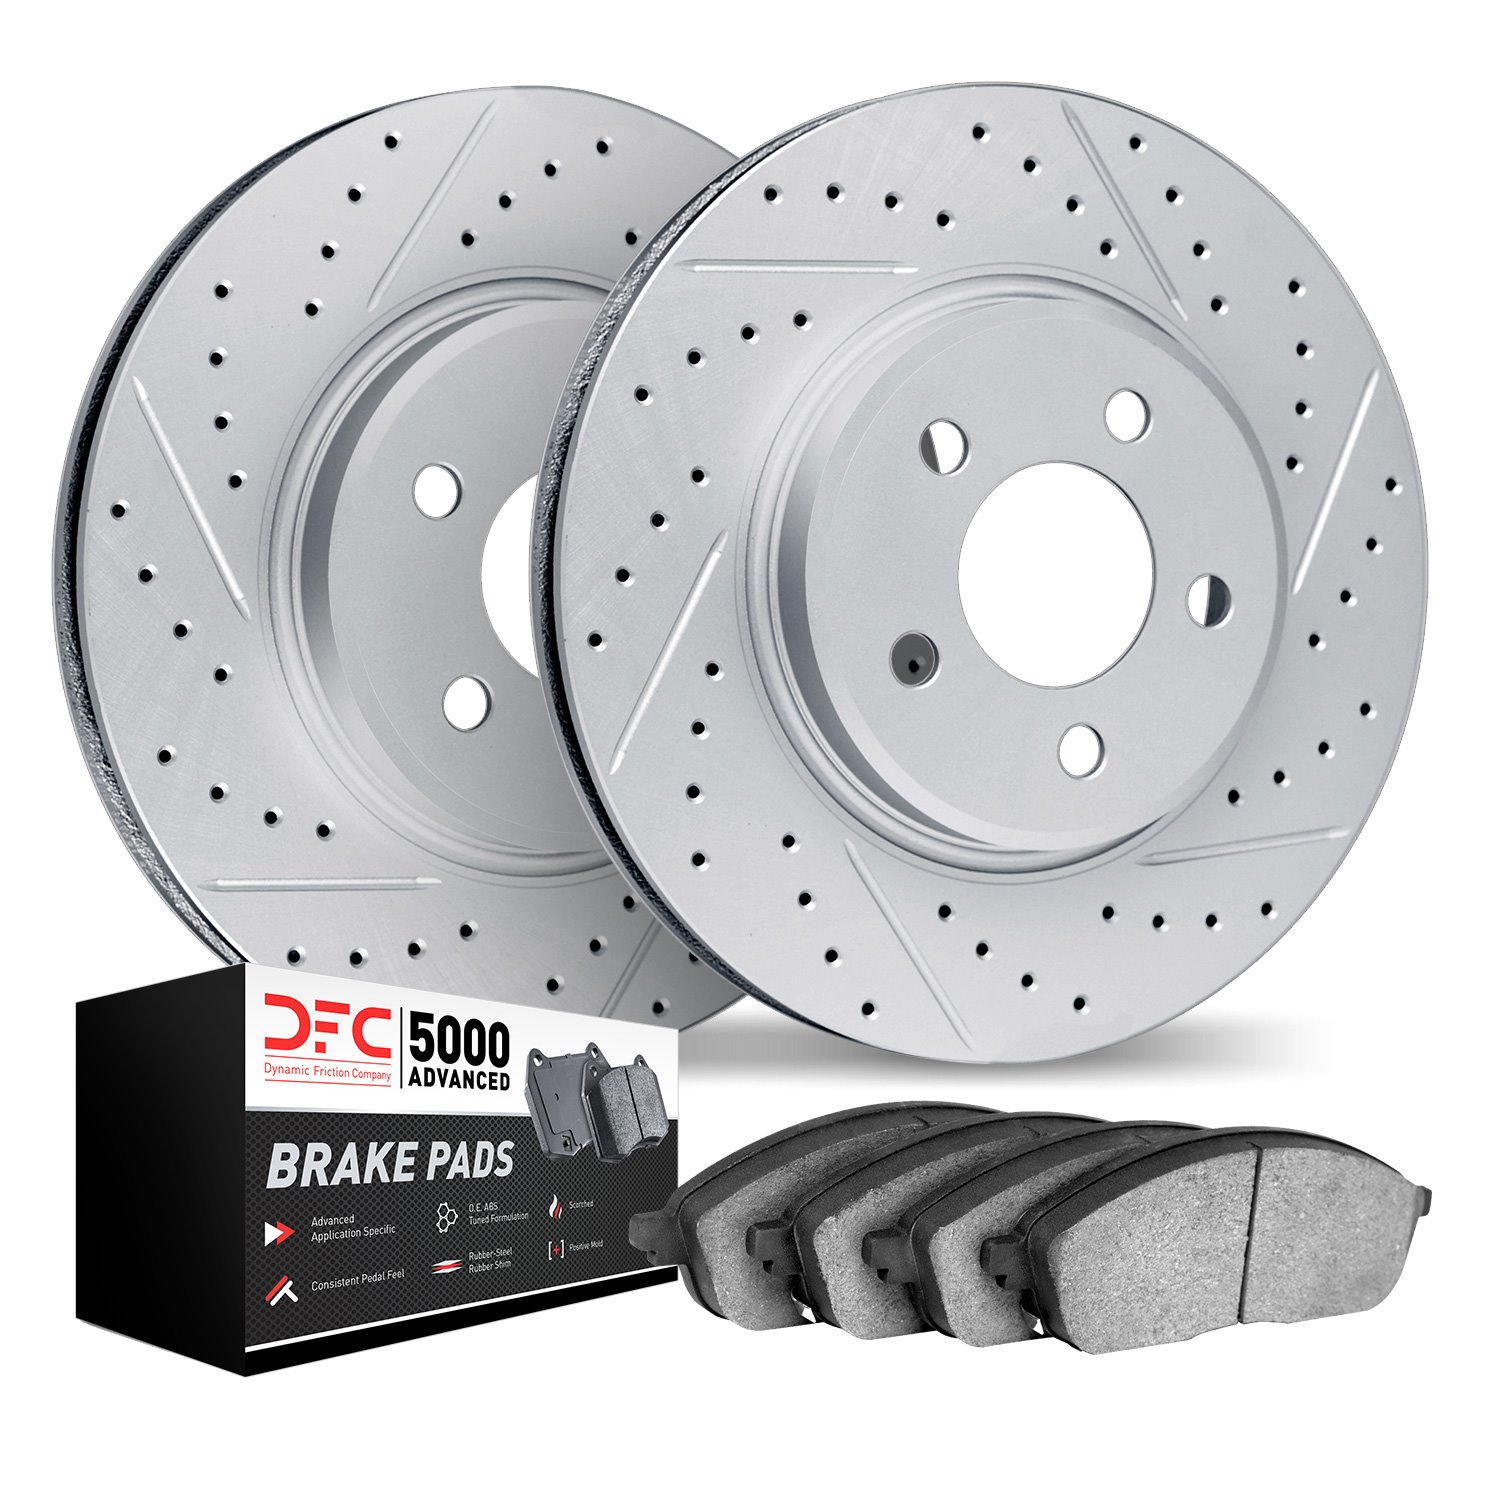 2502-02016 Geoperformance Drilled/Slotted Rotors w/5000 Advanced Brake Pads Kit, 1987-1989 Porsche, Position: Rear